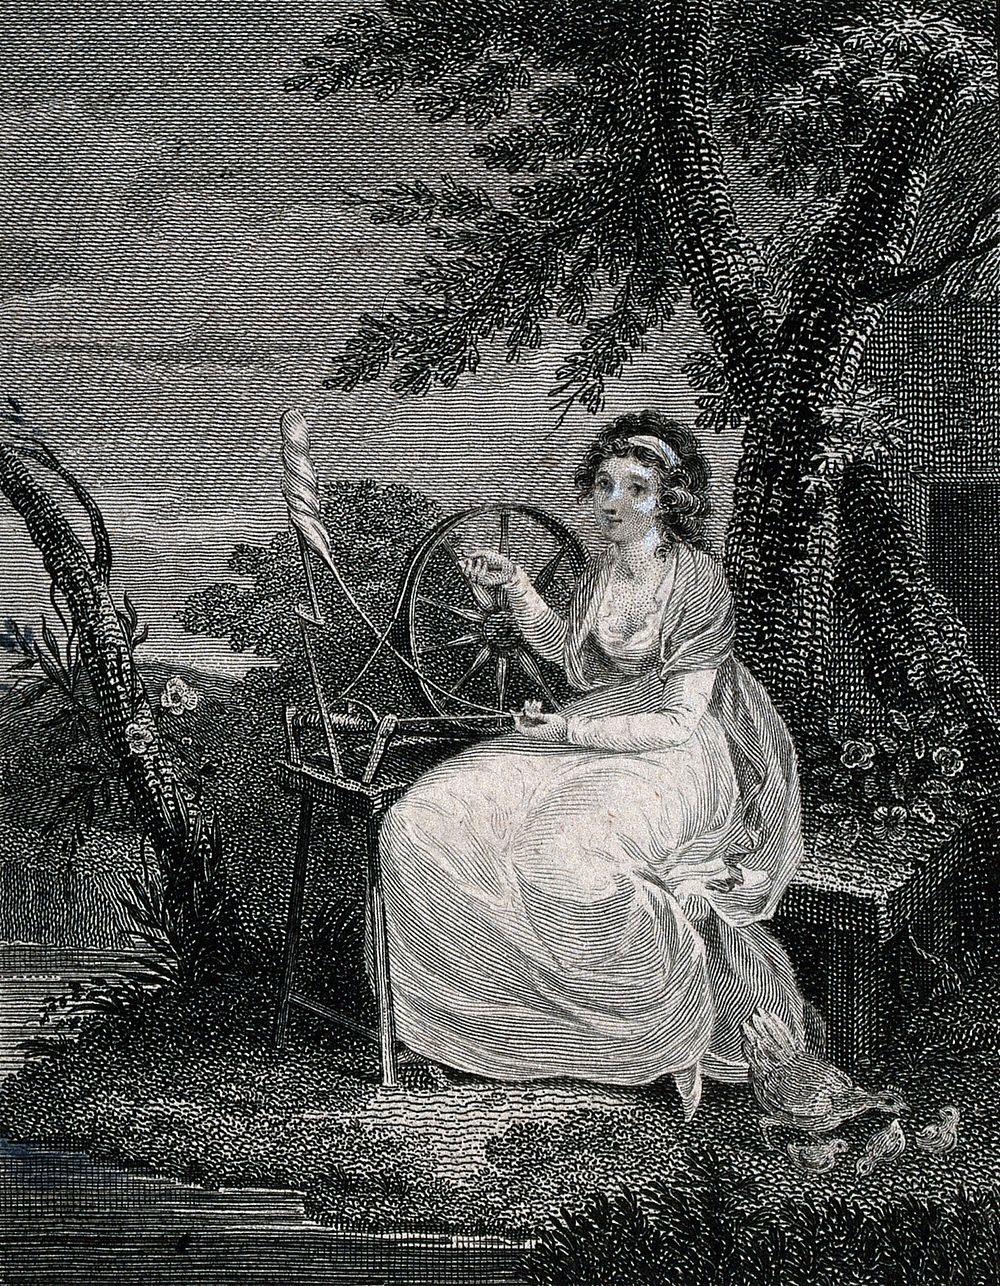 A young woman is using a spinning wheel under a tree with a spindle and shuttle. Engraving by Saunders after Woolley.